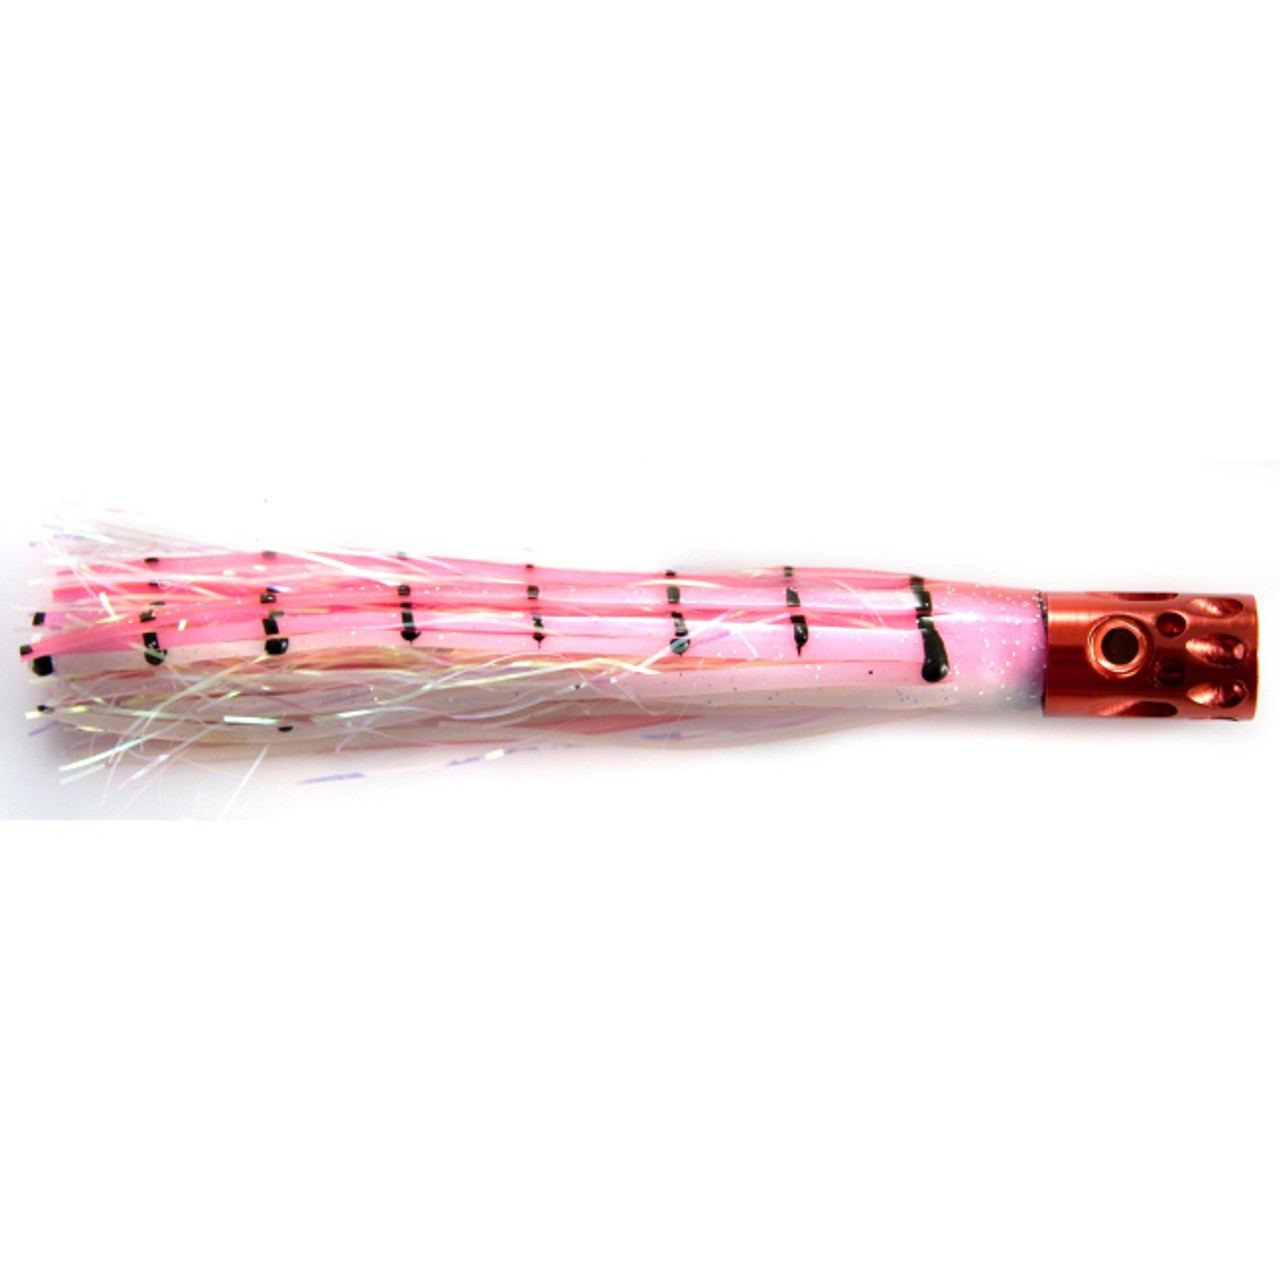 Billy Baits - Magnum Turbo Whistler Lure 